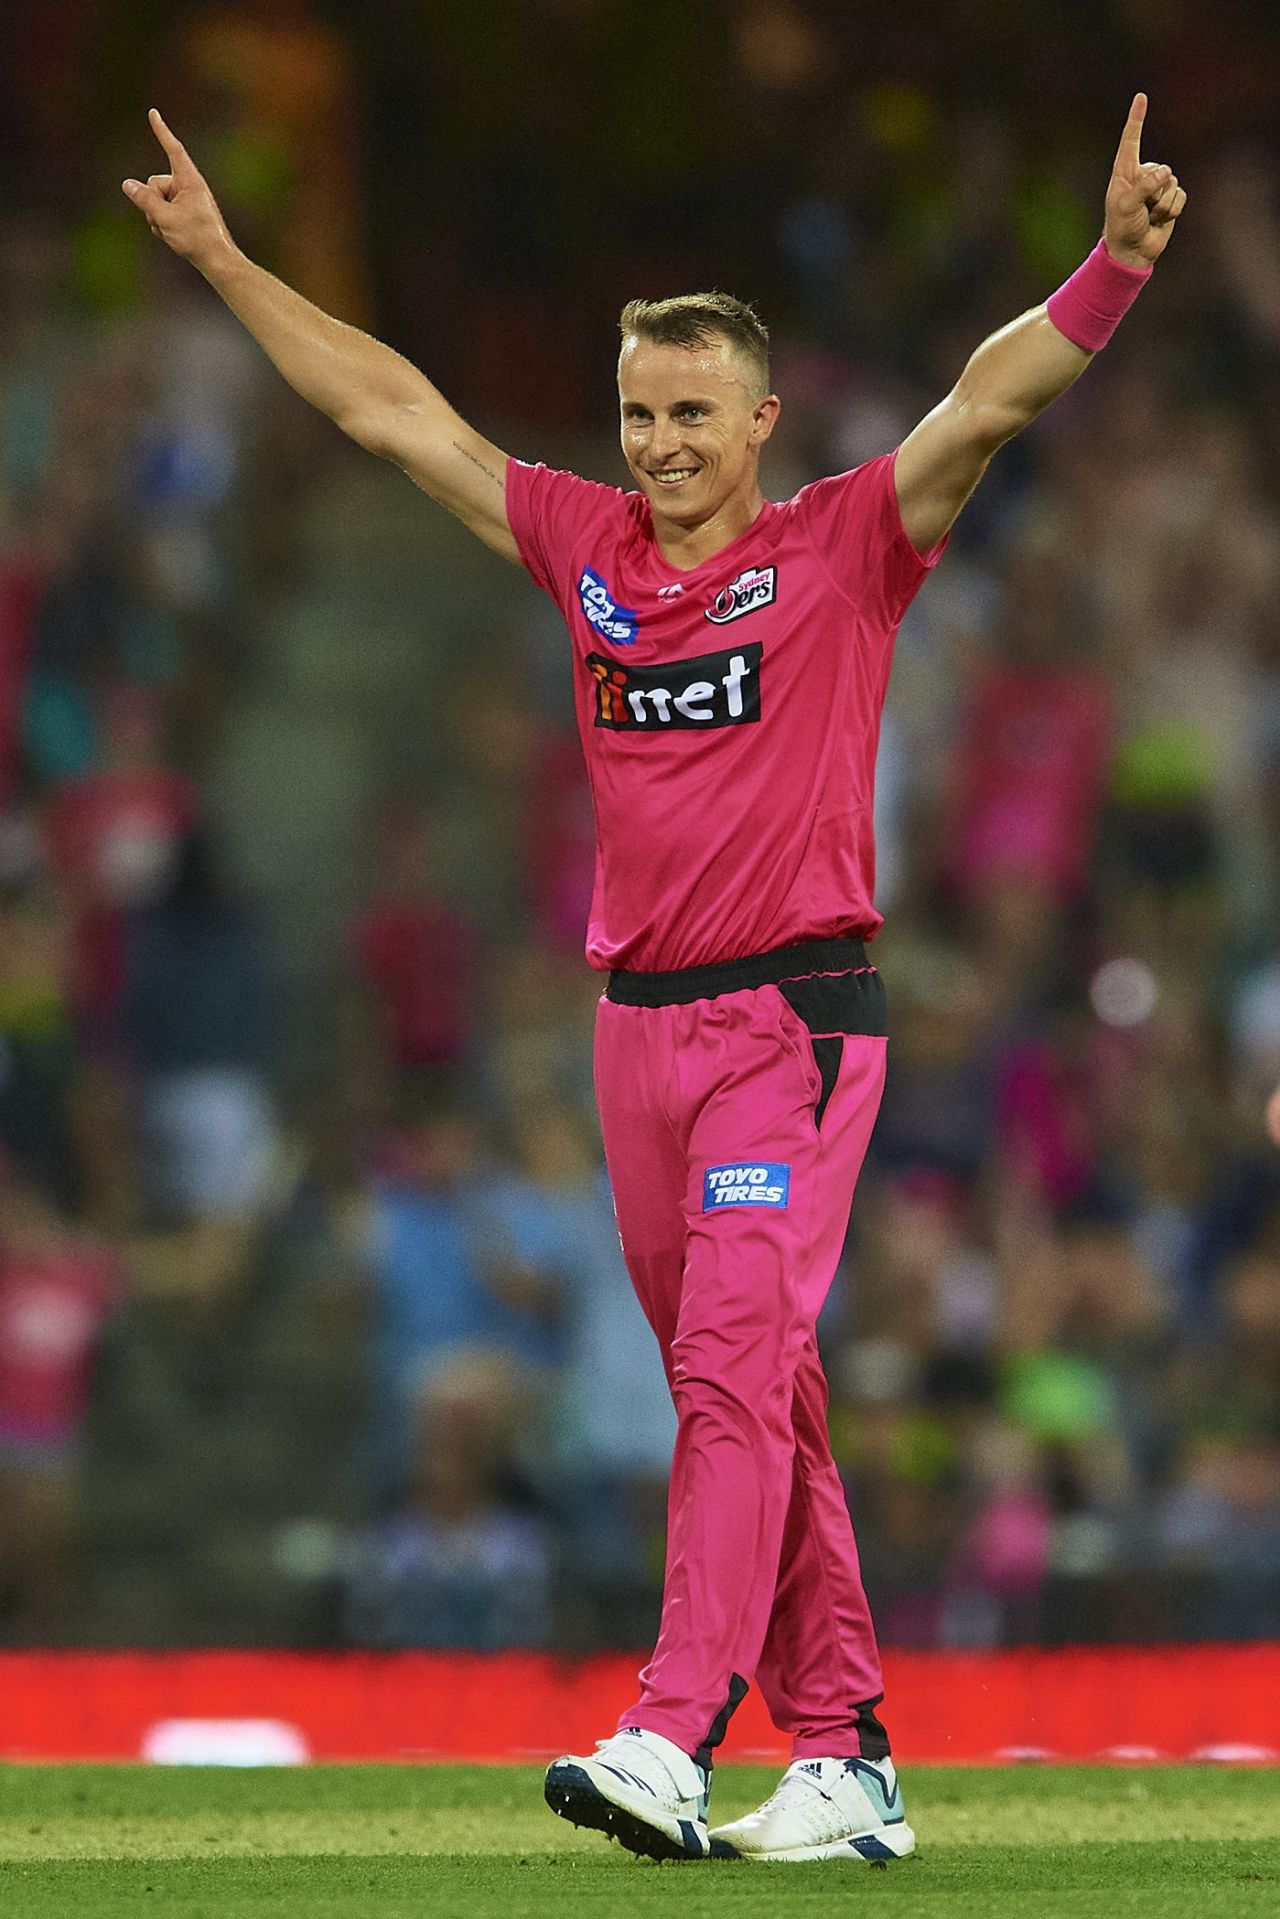 Tom Curran has a knack for thriving in pressure situations, Sydney Sixers v Sydney Thunder, Big Bash League, Sydney, December 28, 2019